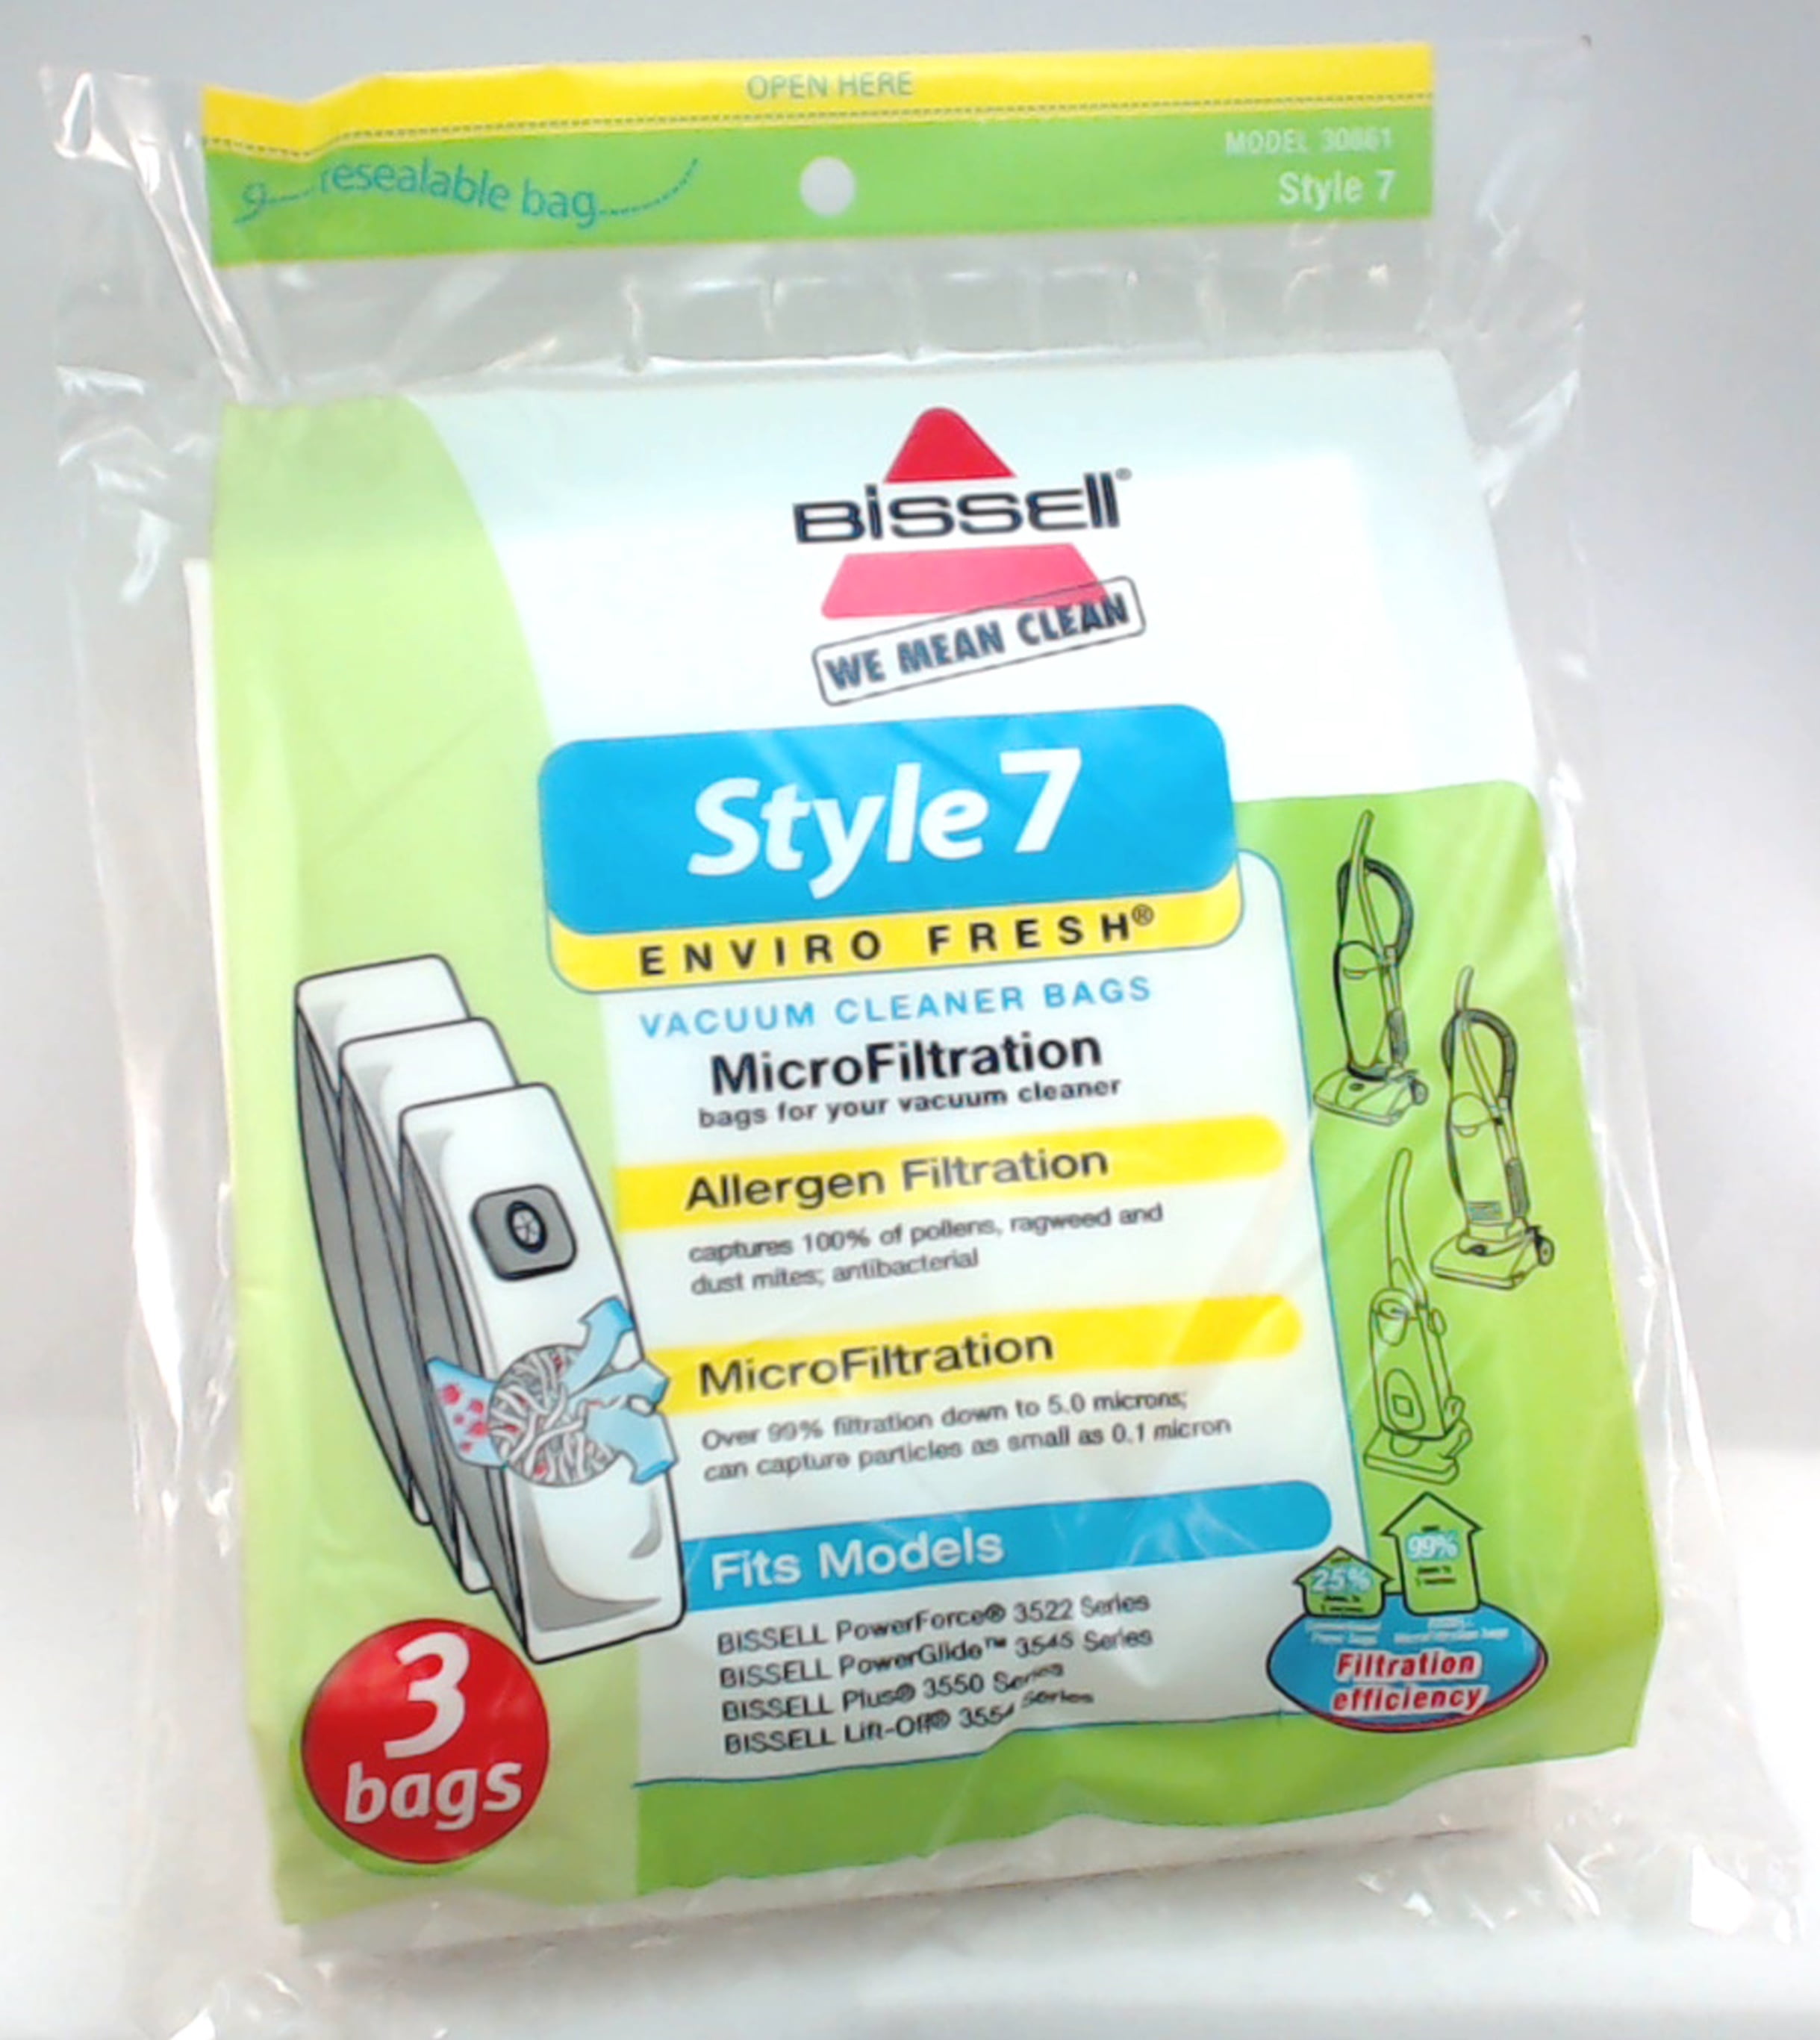 GENUINE BISSELL Vacuum Bags 3550 3545 Style 7 For 3522 3554 Series 24 BAGS 